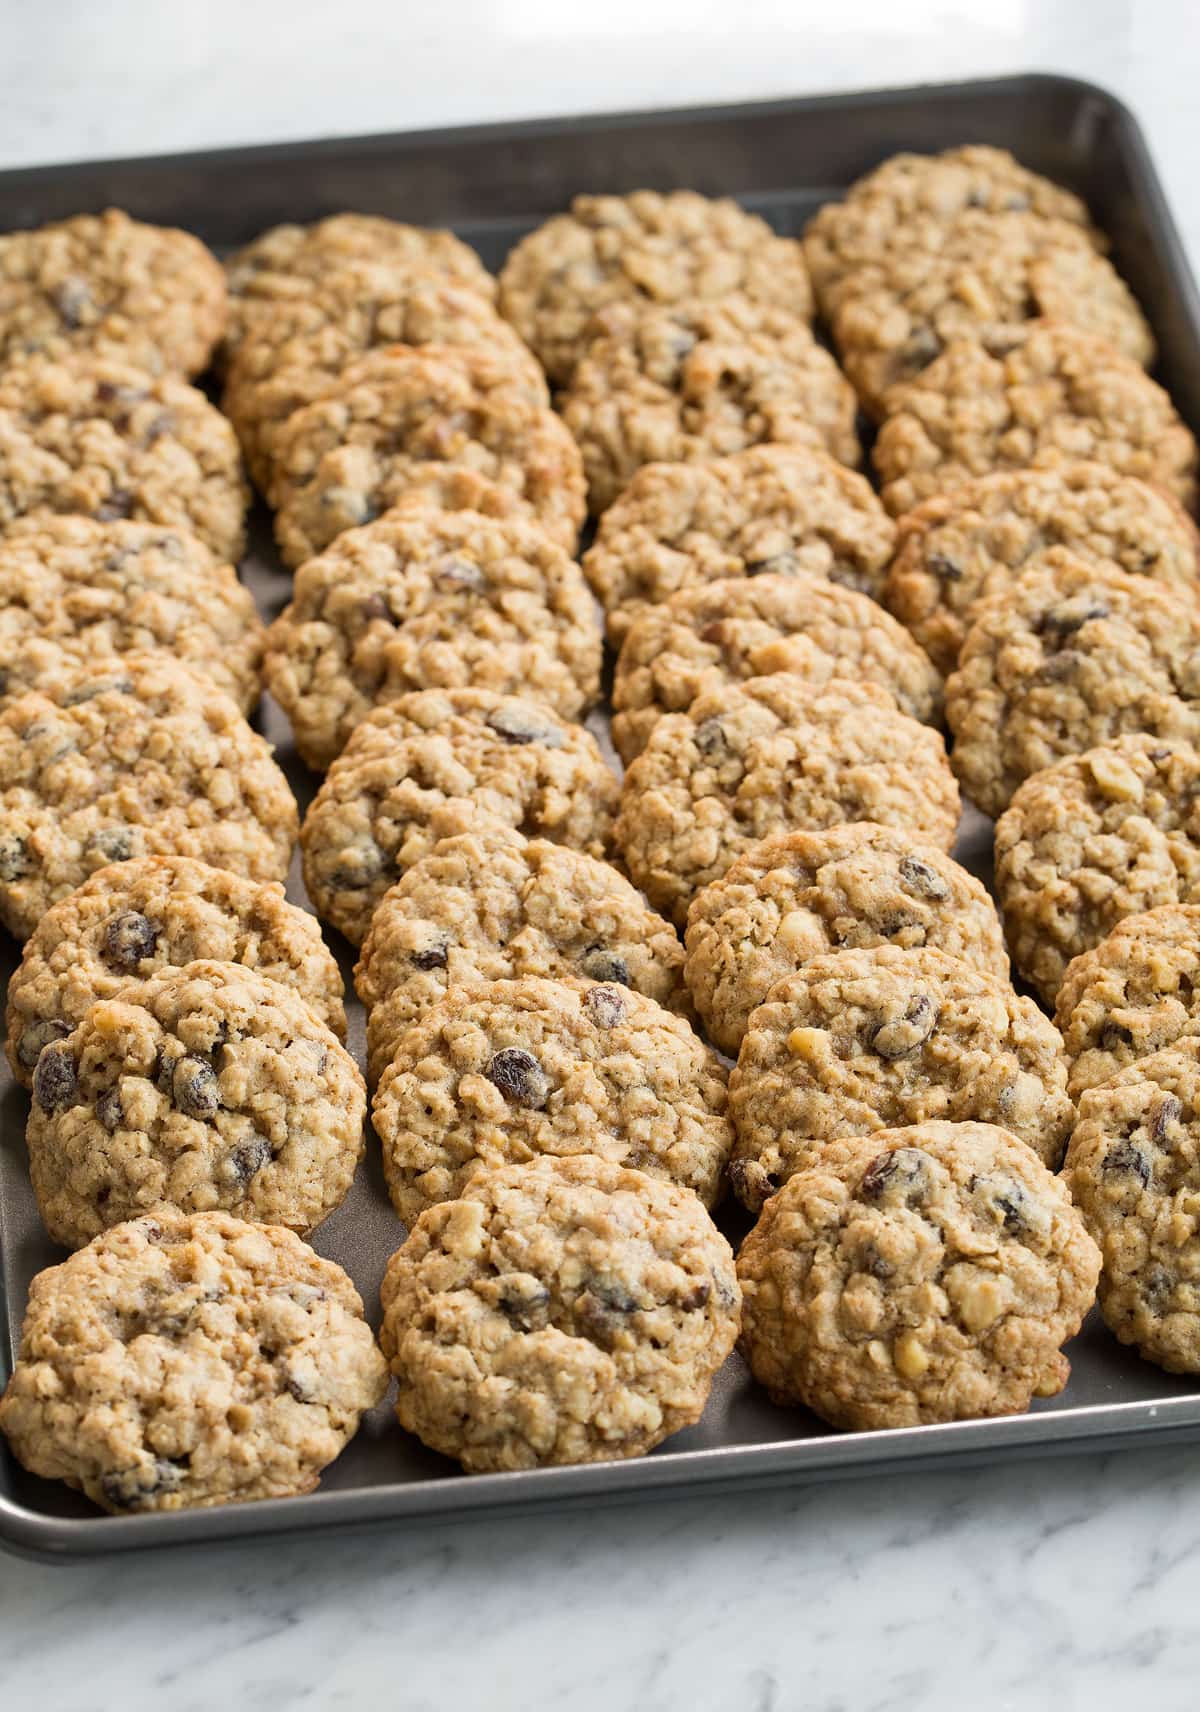 Whole batch of oatmeal cookies on baking sheet in rows after cooling.